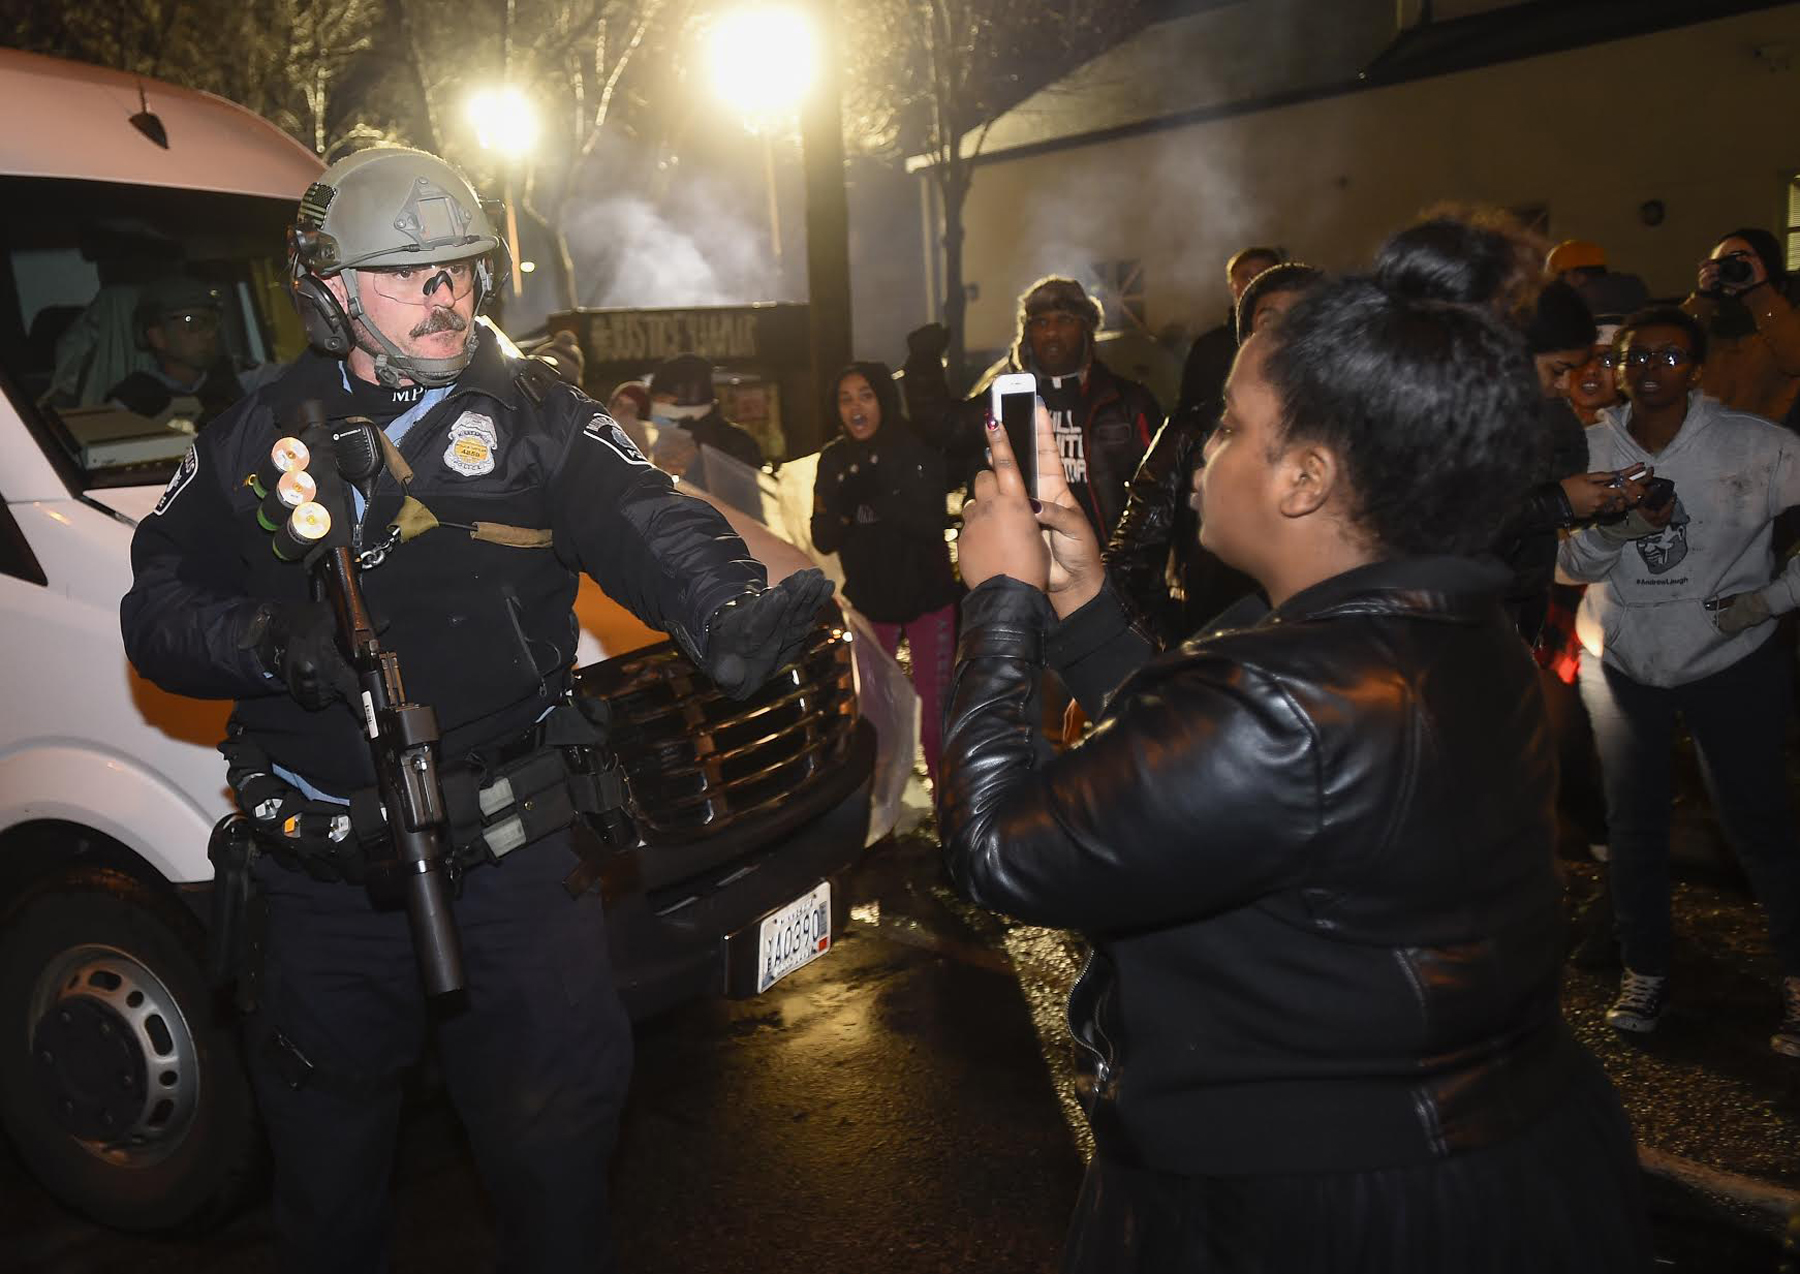 PHOTO: A police officer tells a women to back up as she photographs him in front of a north Minneapolis police precinct during a protest in response to Sunday's shooting death of Jamar Clark by police officers in Minneapolis, Nov. 18, 2015.